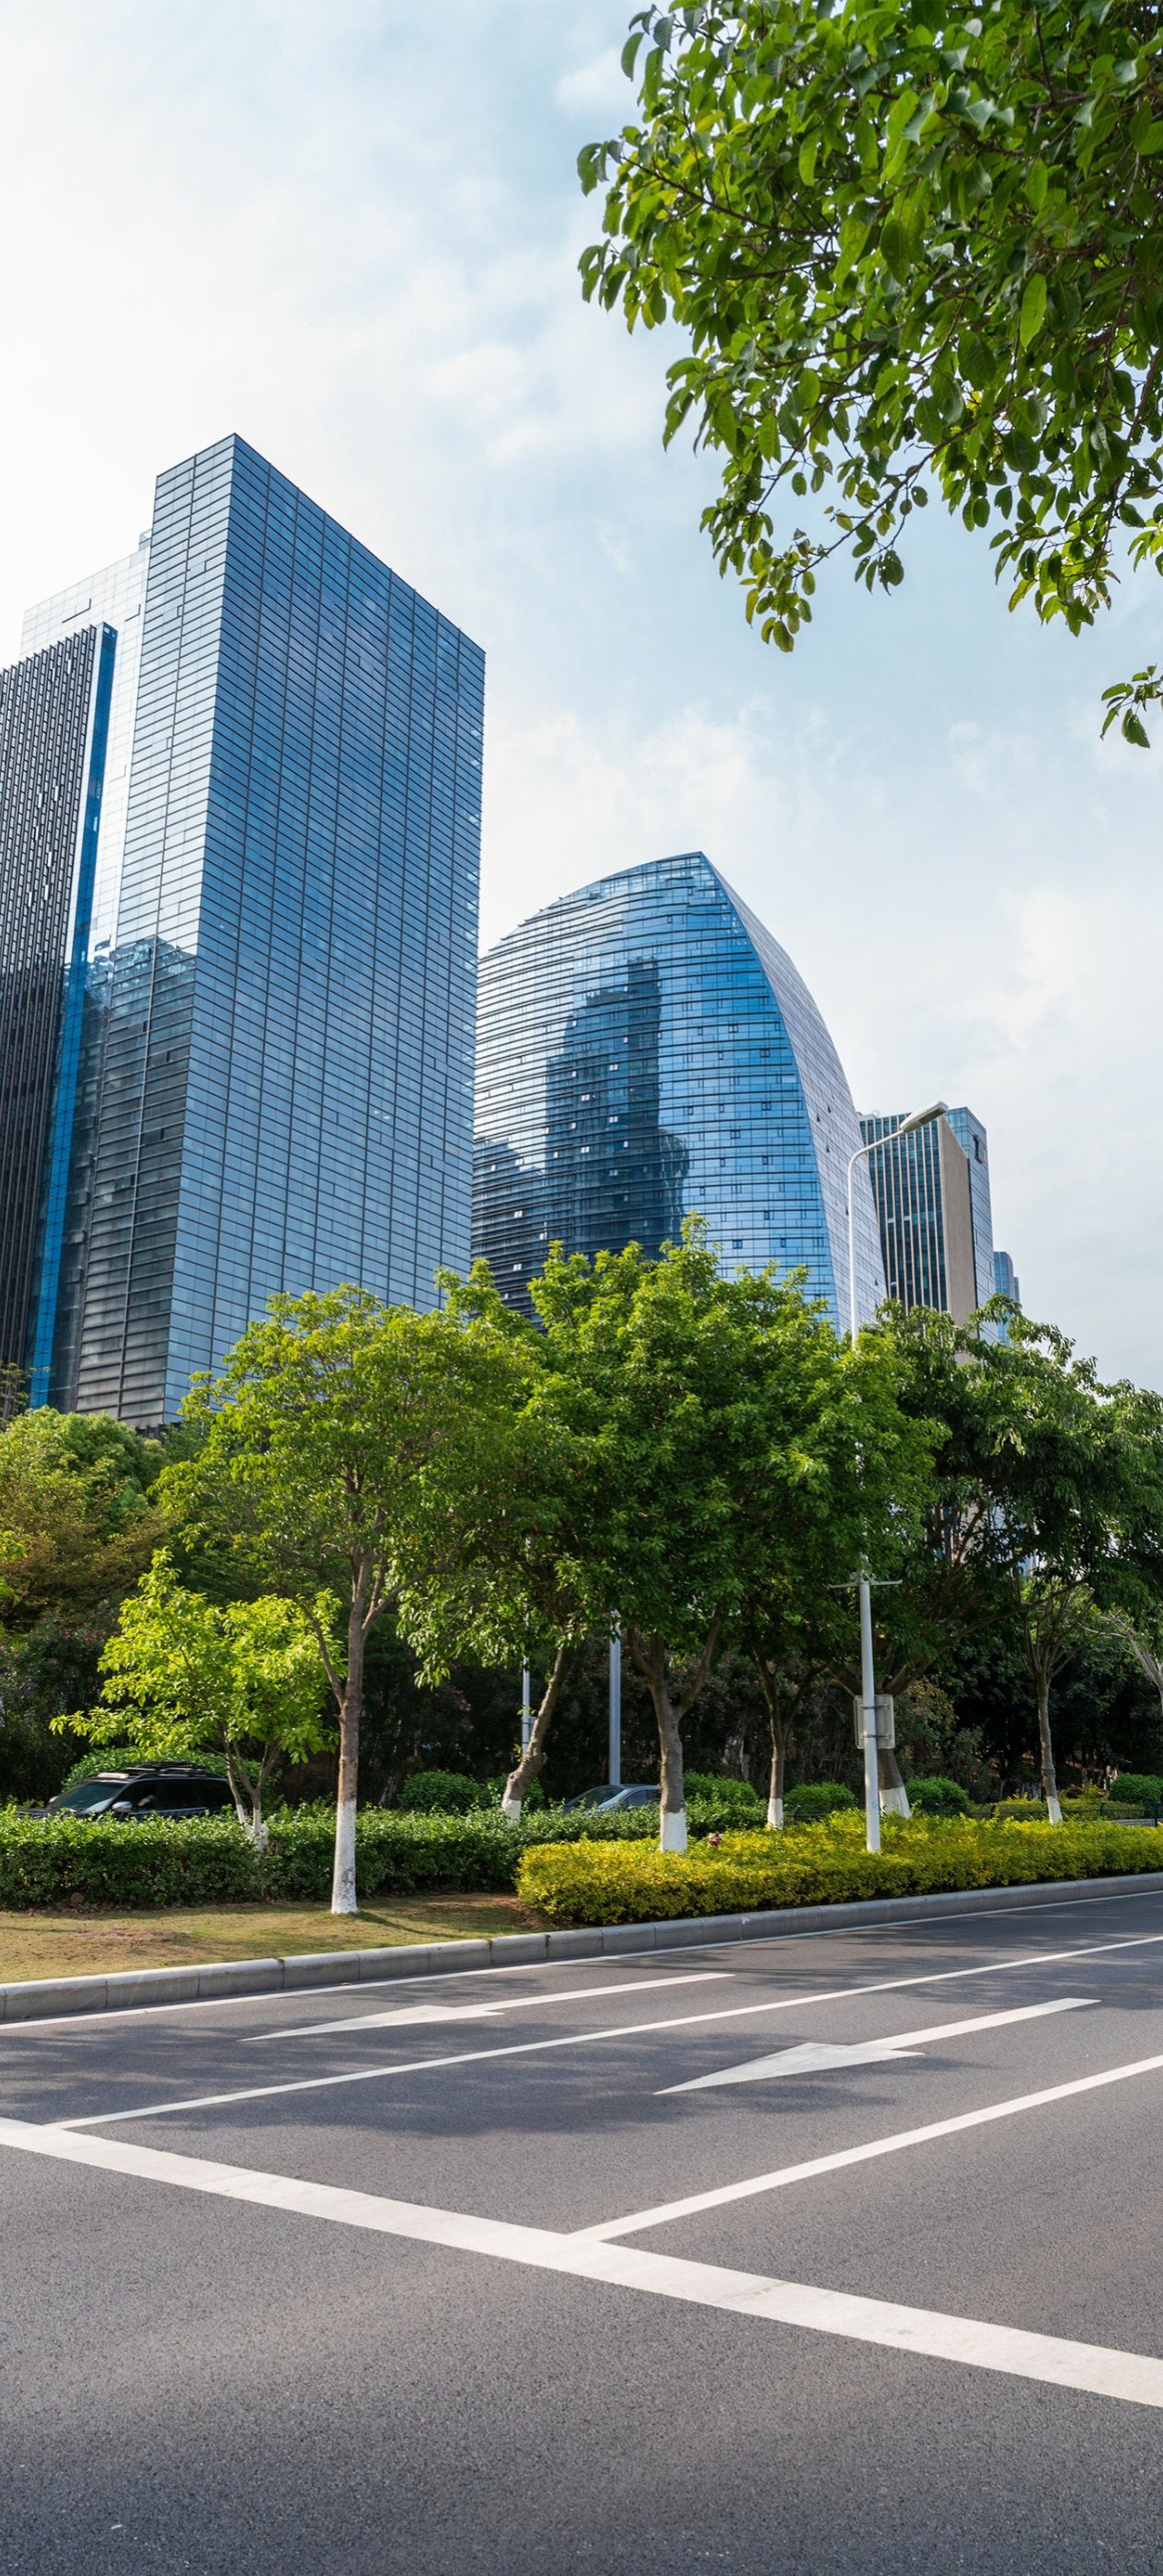 Trees in front of skyscrapers